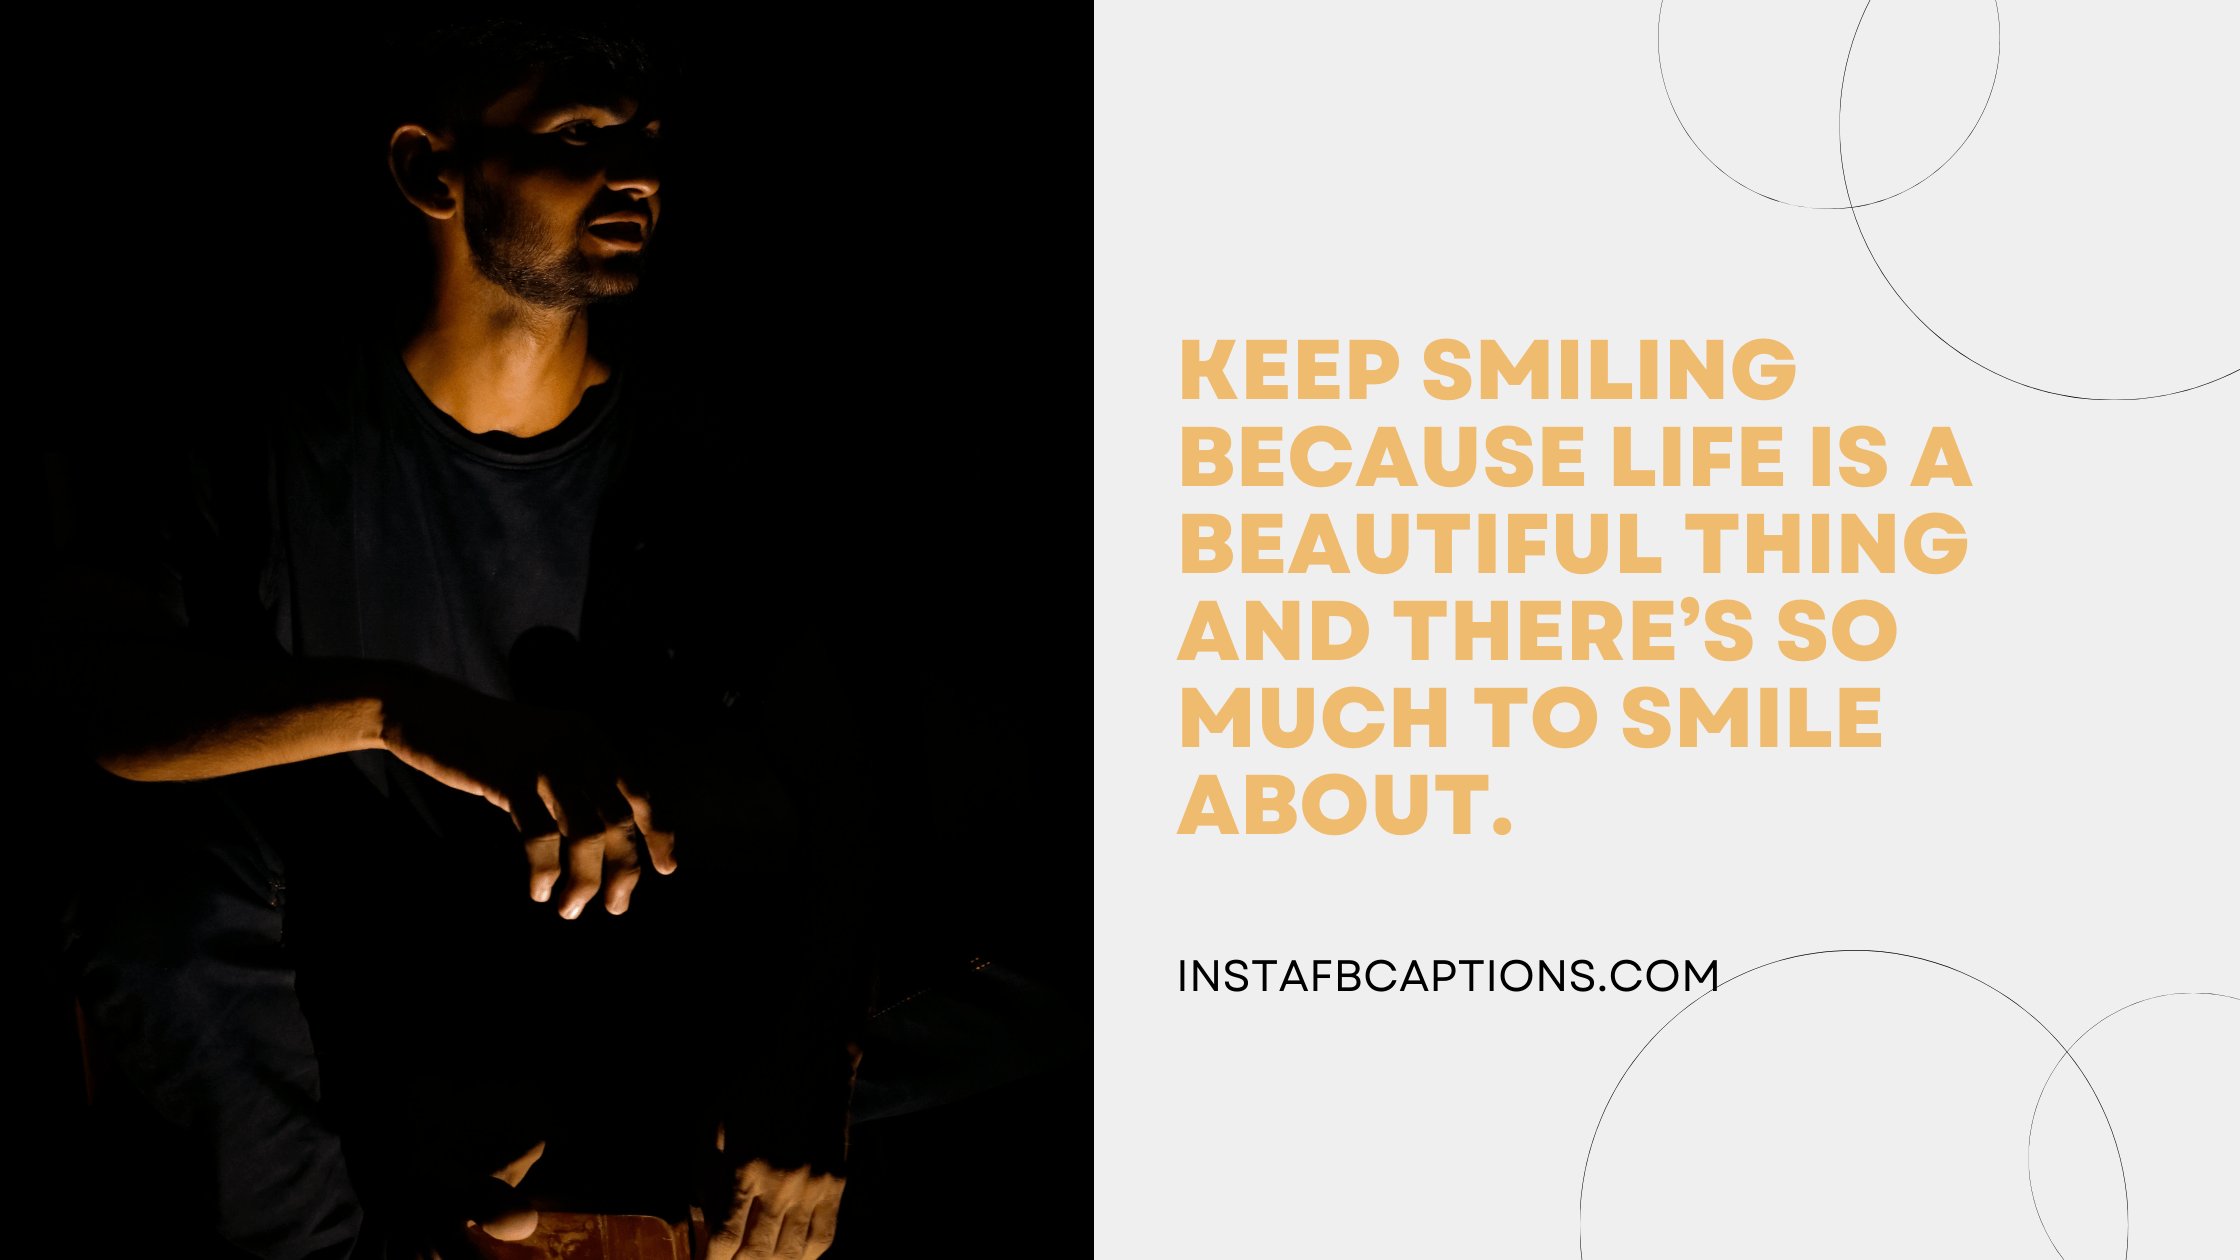 Keep smiling because life is a beautiful thing and there’s so much to smile about.  - Night Selfie Captions for Instagram - 210+ Good Night Instagram Captions &#038; Quotes [2023]